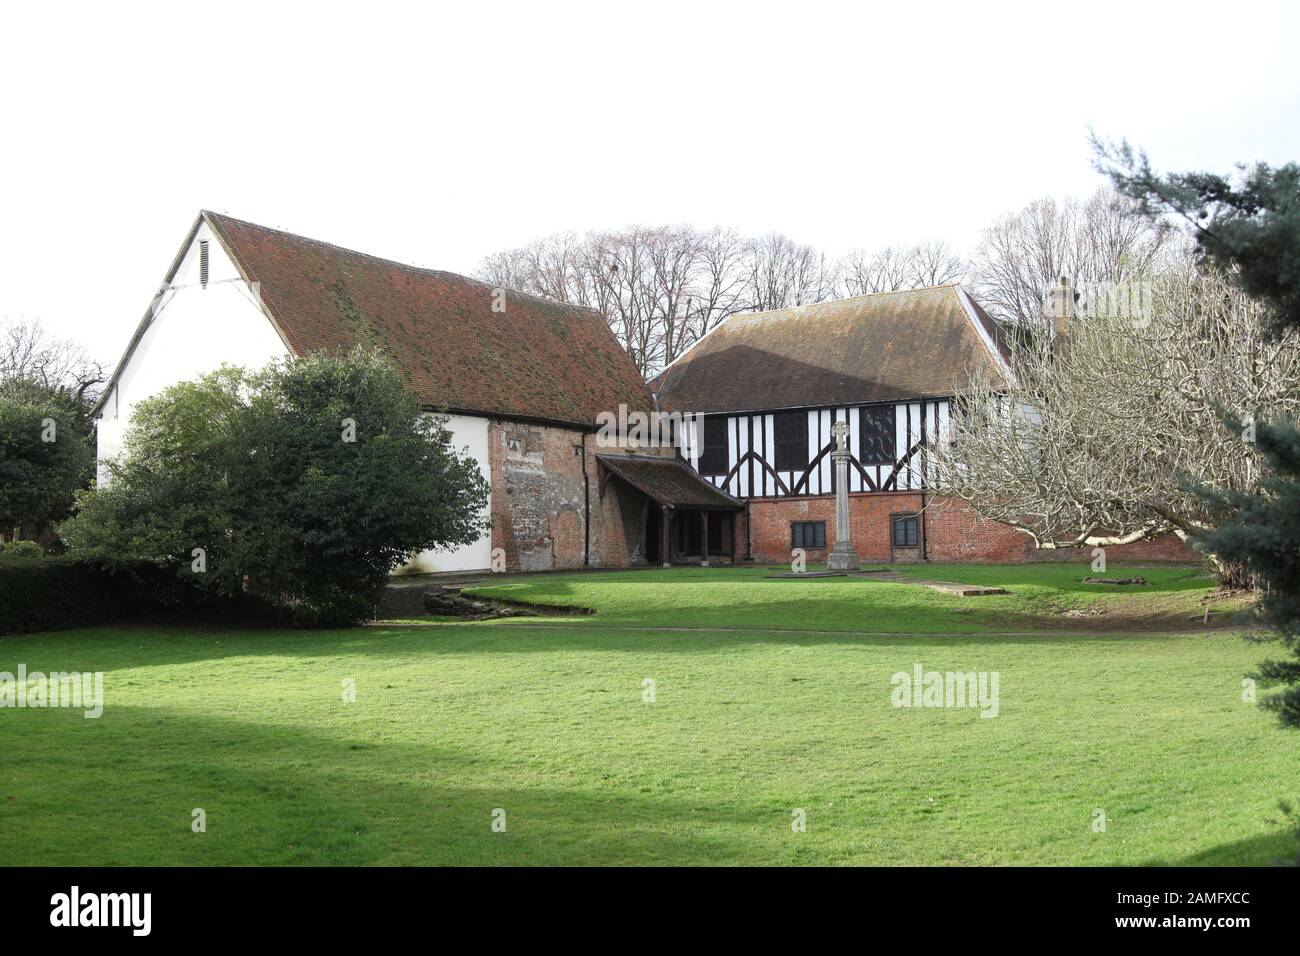 View of Prittlewell Priory from across the lawn, Southend on Sea, Essex, UK, January 2020 Stock Photo